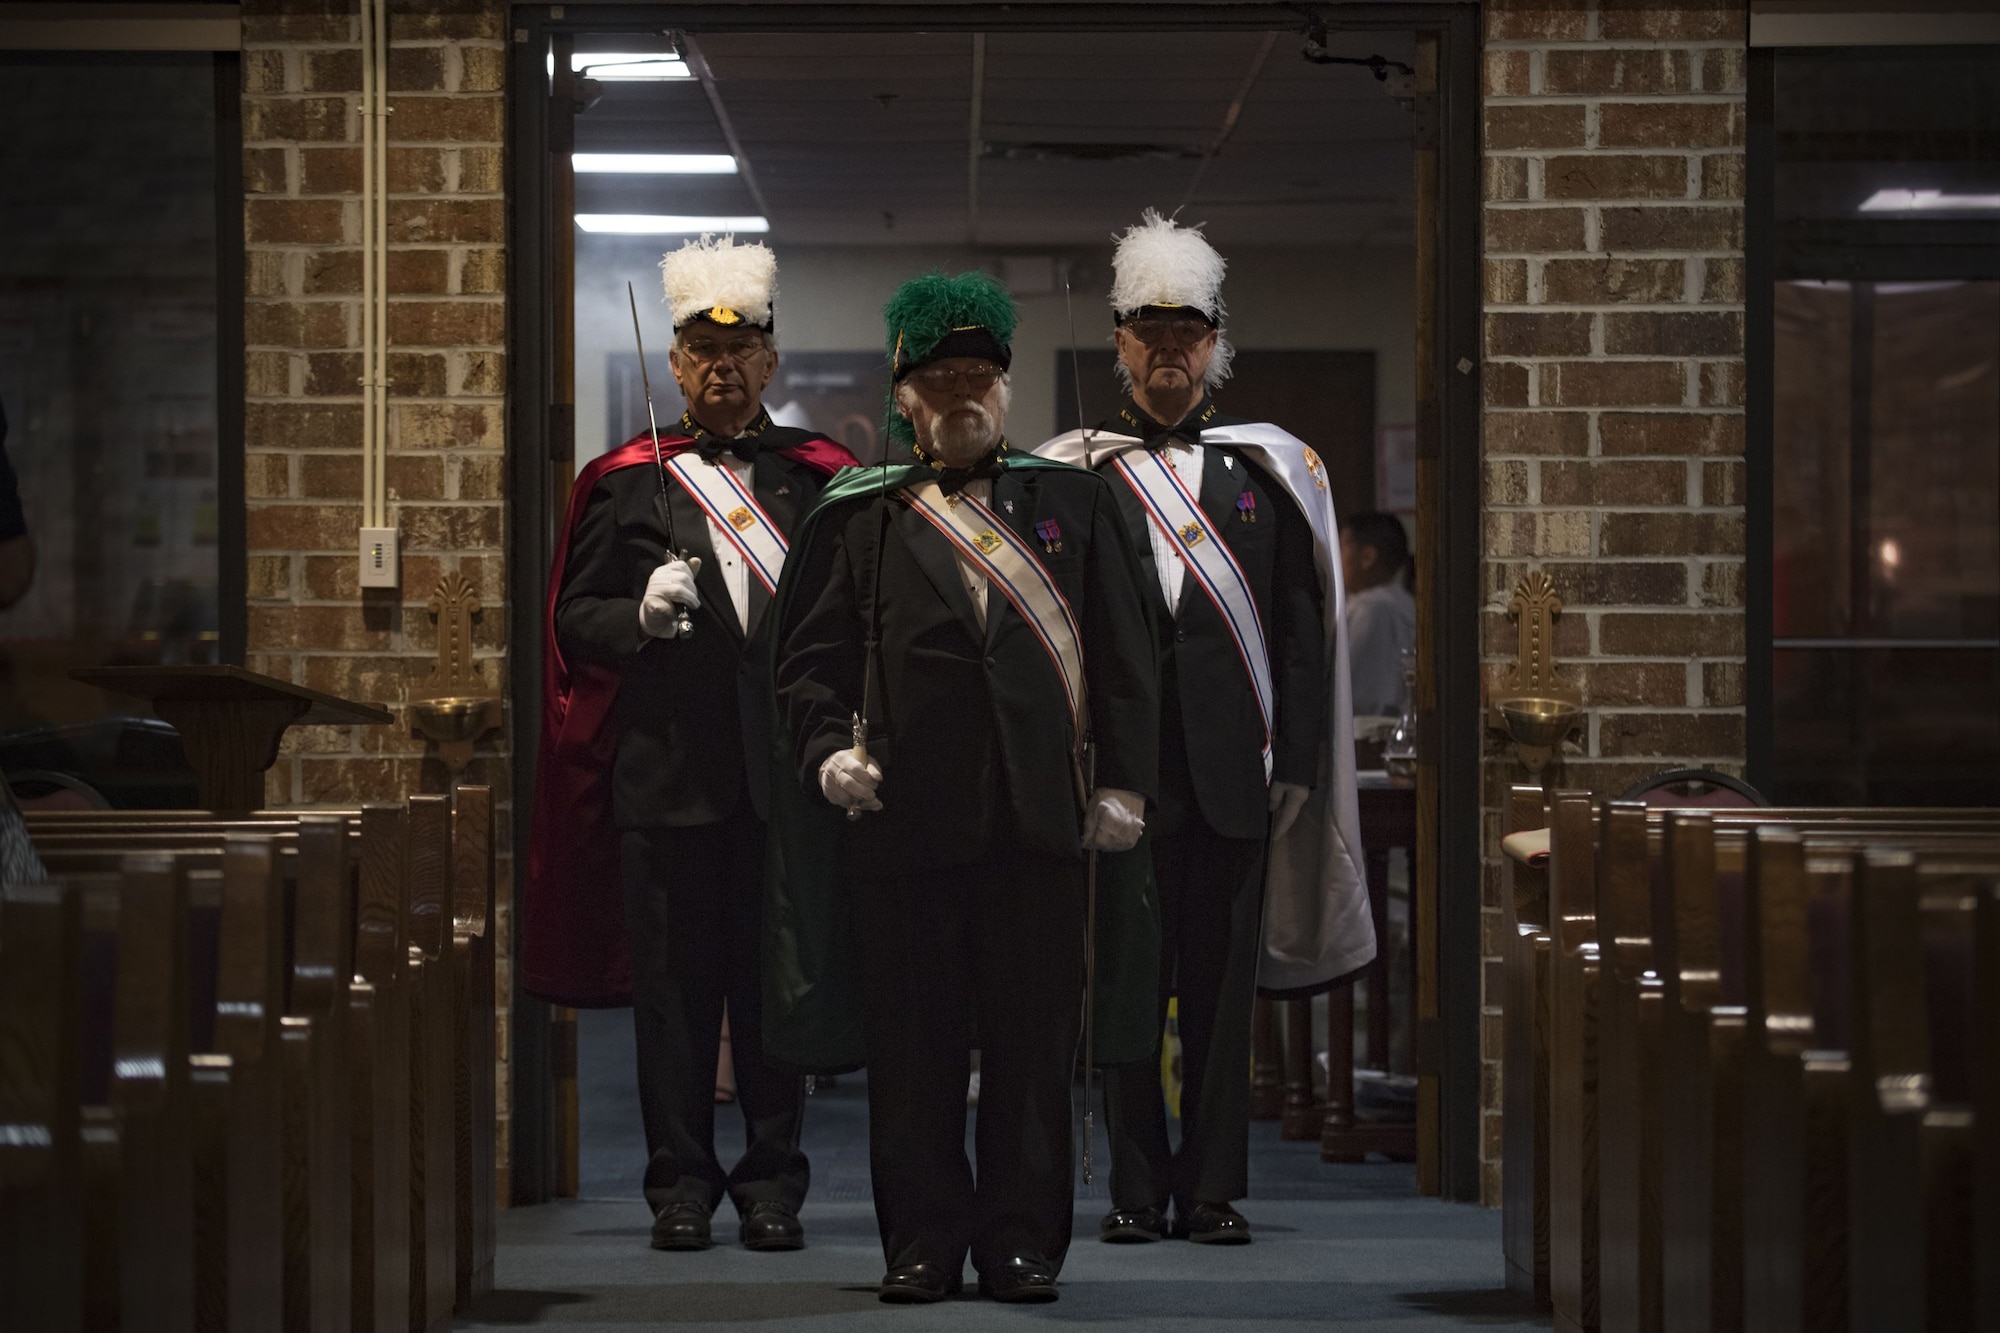 Members of the Knights of Columbus, council 4913, enter into a sanctuary shortly before Bishop Robert J. Coyle, Archdiocese of the Military Services, performs a Sacrament of Confirmation ceremony, Feb. 12, 2018, at Moody Air Force Base, Ga. Confirmation is the sacrament by which Catholics believe the Holy Spirit gives them the increased ability to practice their faith in every aspect of their lives and to witness Christ in every situation.  The Sacrament of Confirmation helps a person remain faithful to his or her baptismal commitment to witness to Christ and to serve others. (U.S. Air Force photo by Senior Airman Daniel Snider)